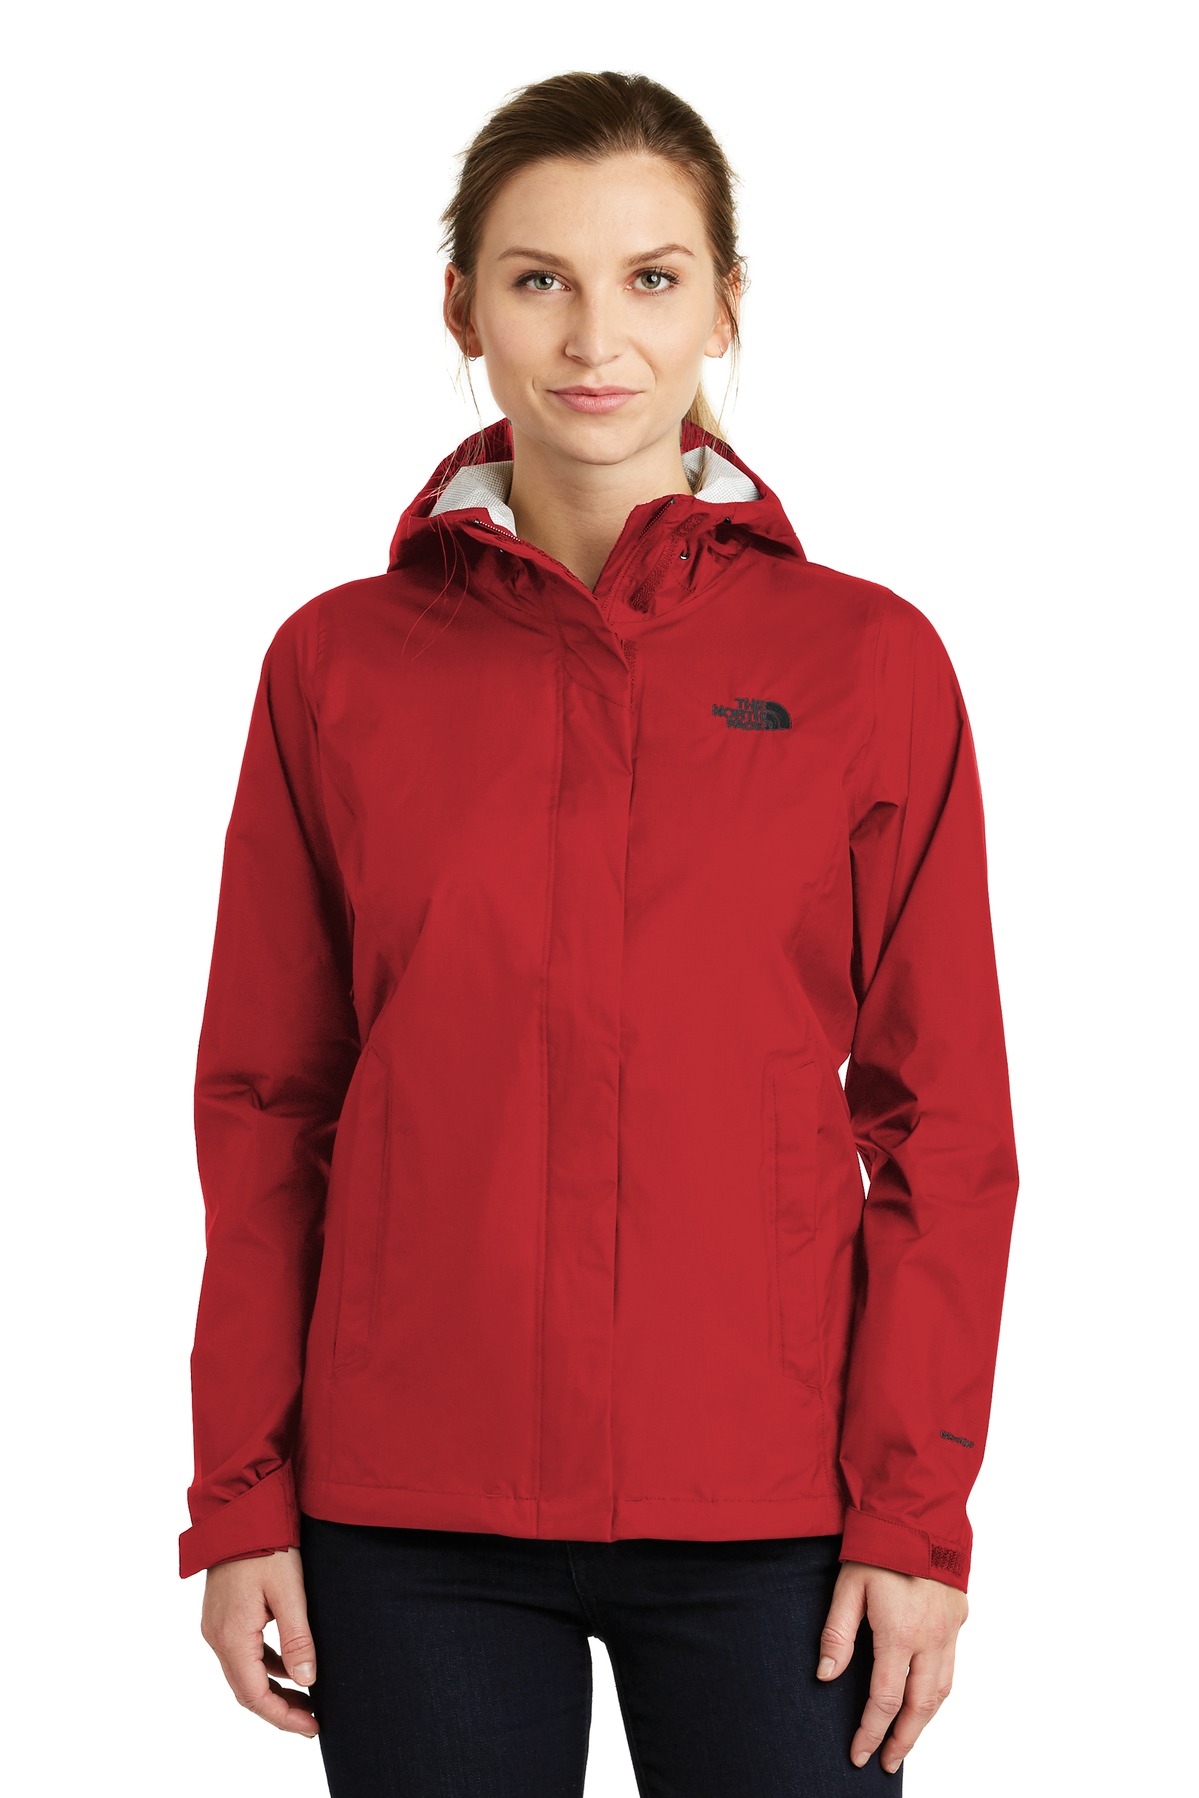 The North Face Ladies DryVent Rain Jacket. NF0A3LH5